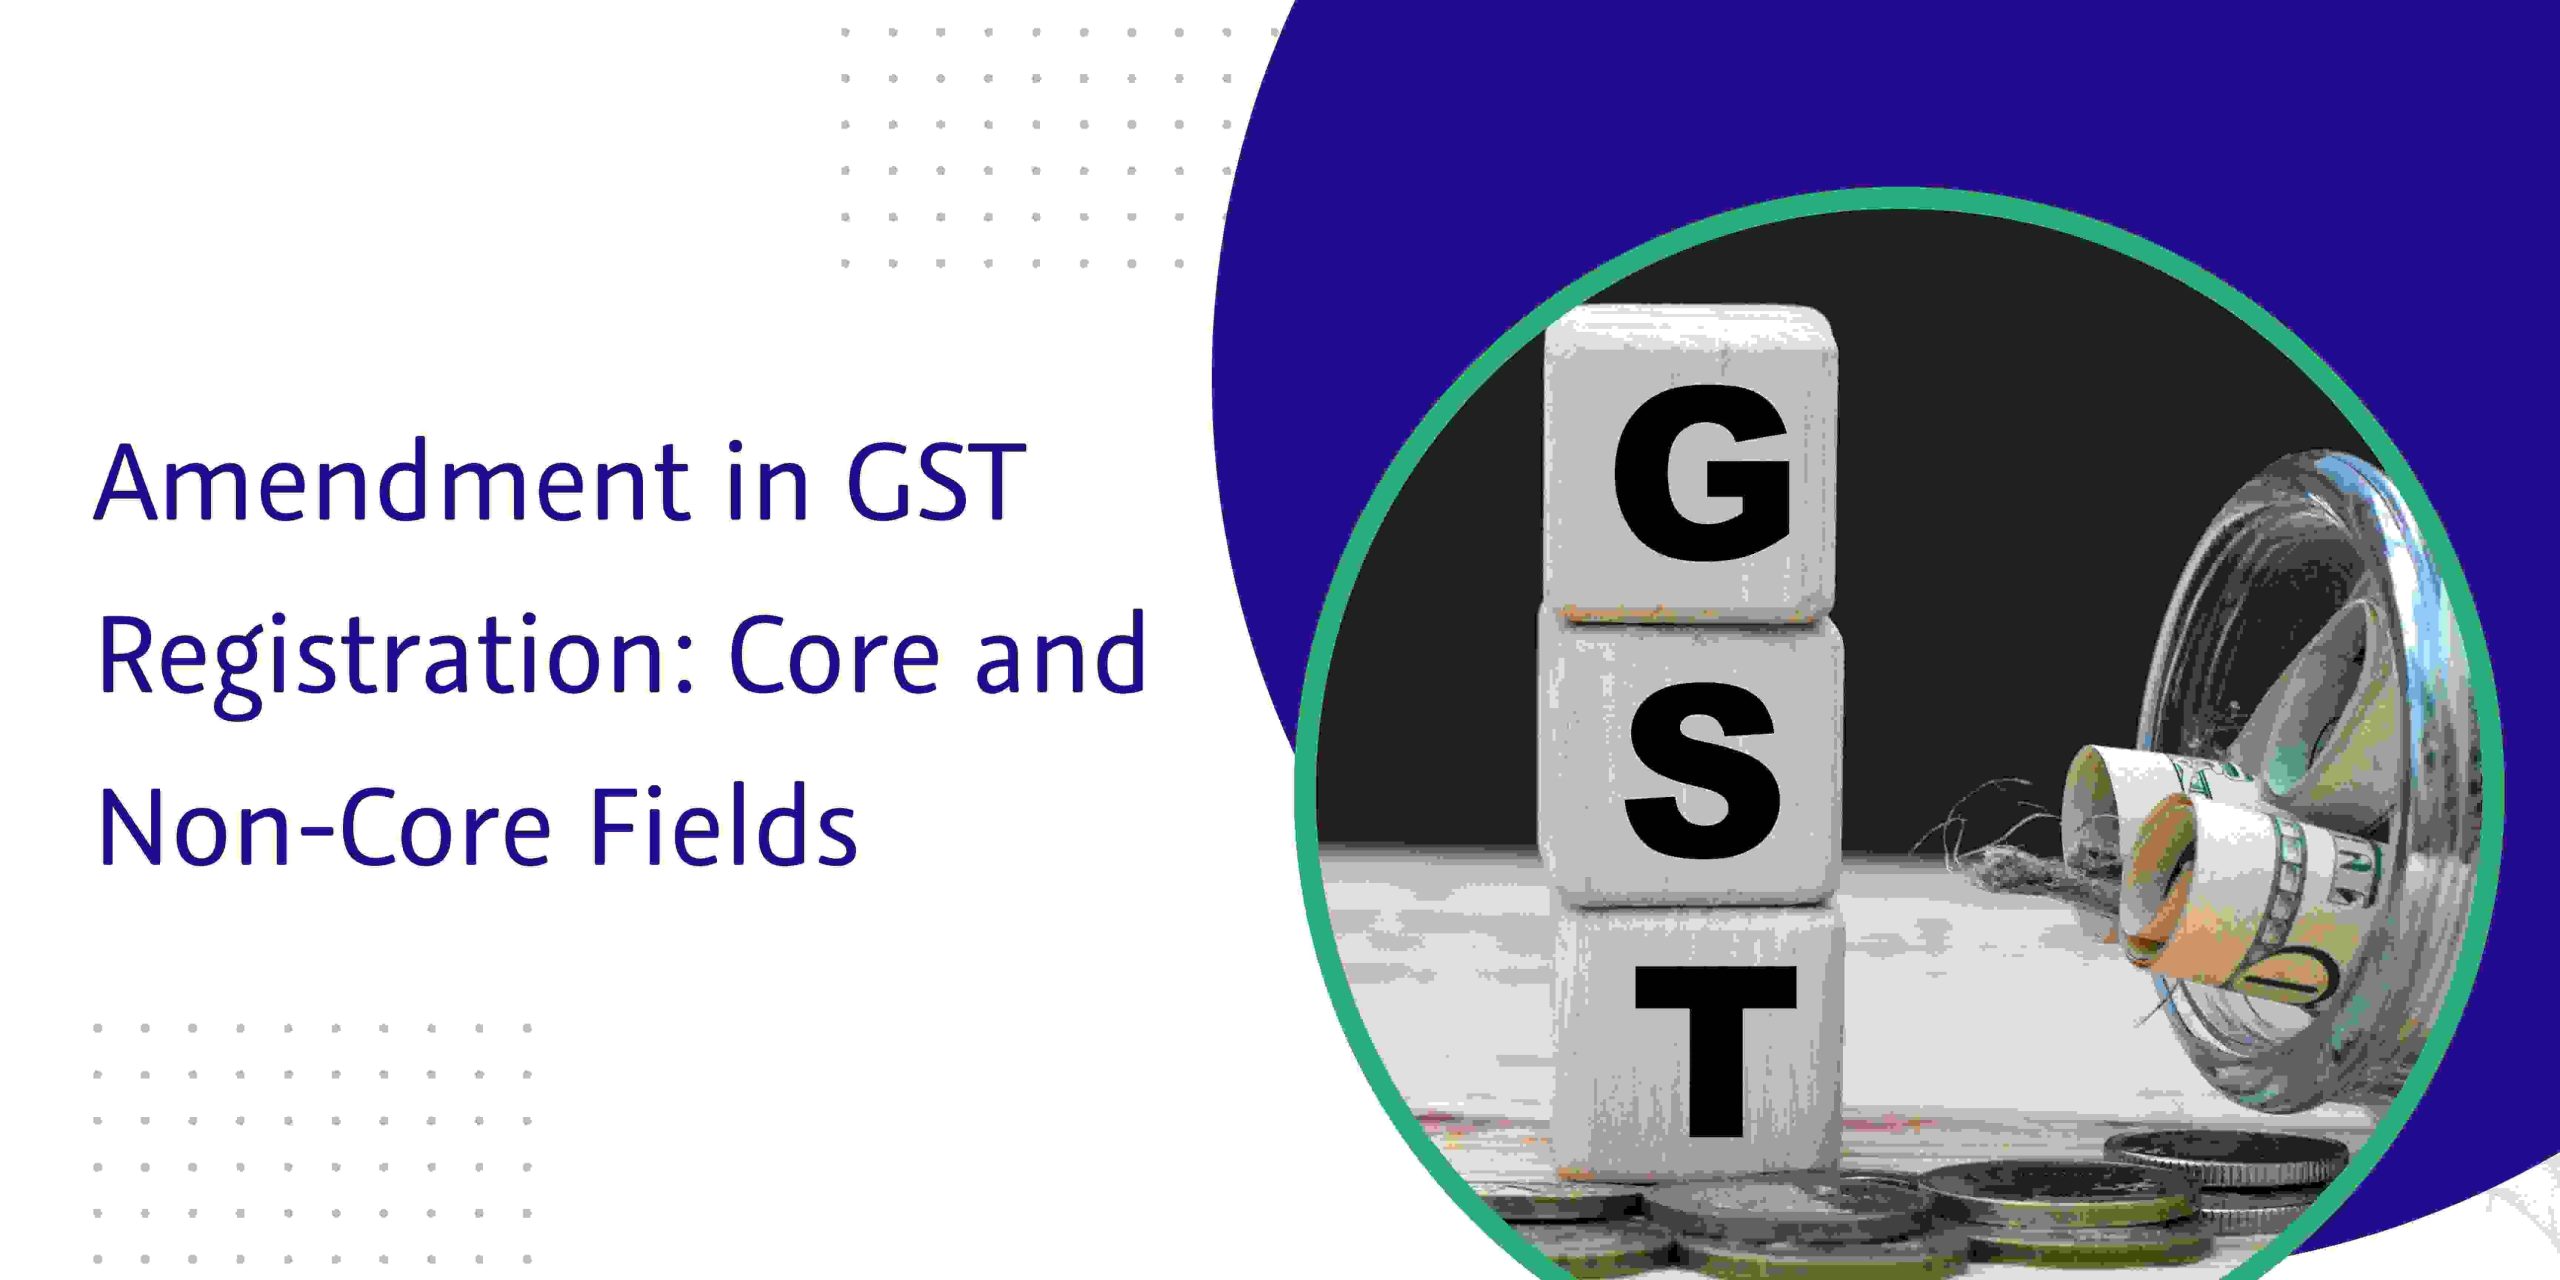 You are currently viewing Amendment in GST Registration: Core and Non-Core Fields